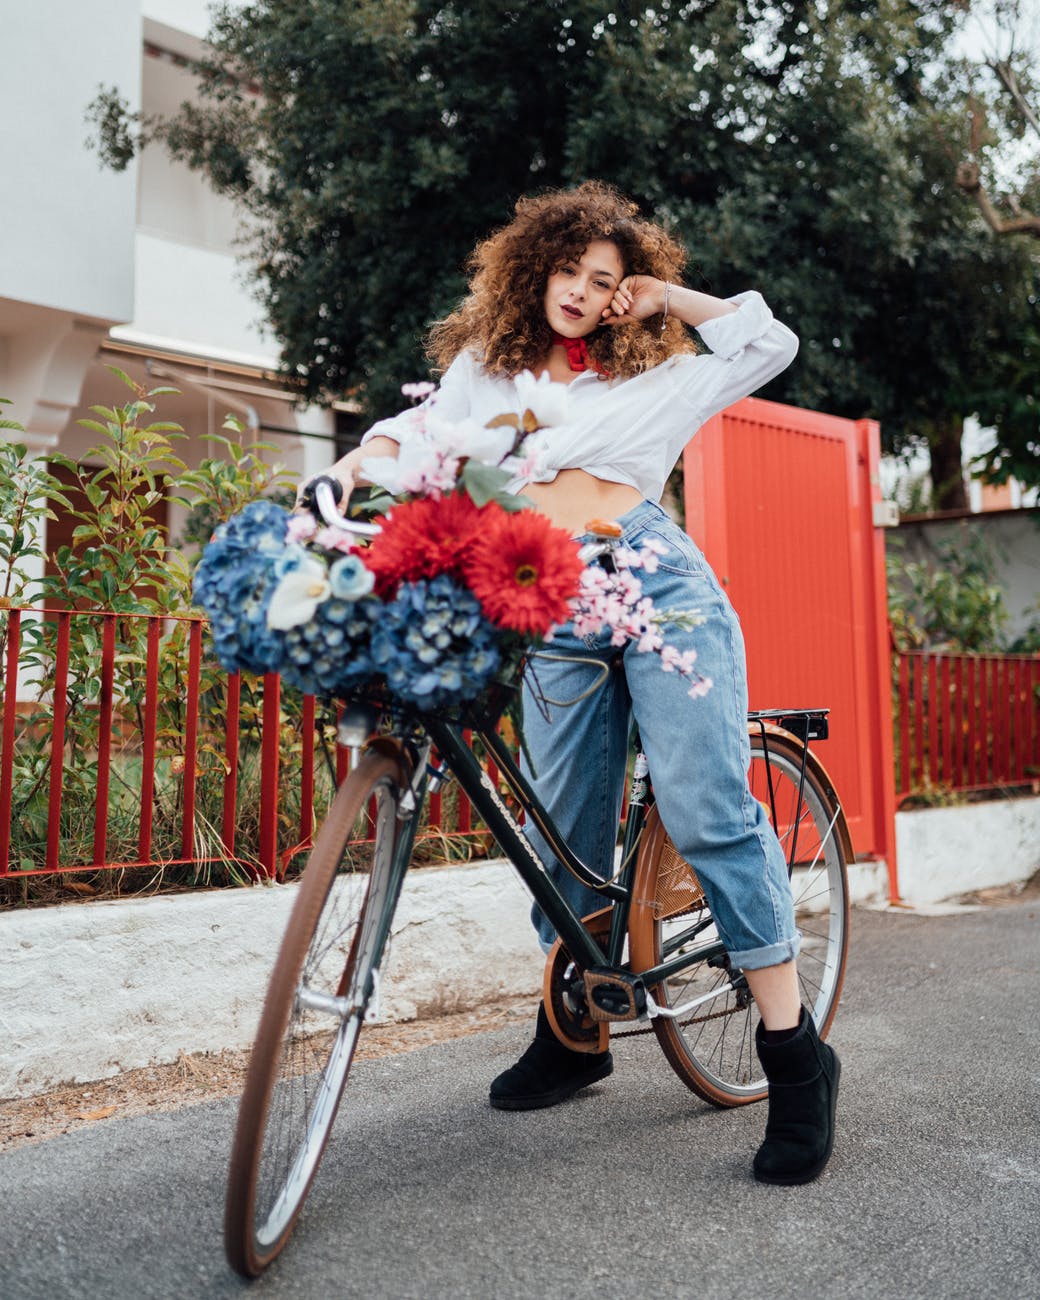 Sve ono što ne mogu,

woman in white long sleeve shirt and blue denim jeans standing with bicycle on road